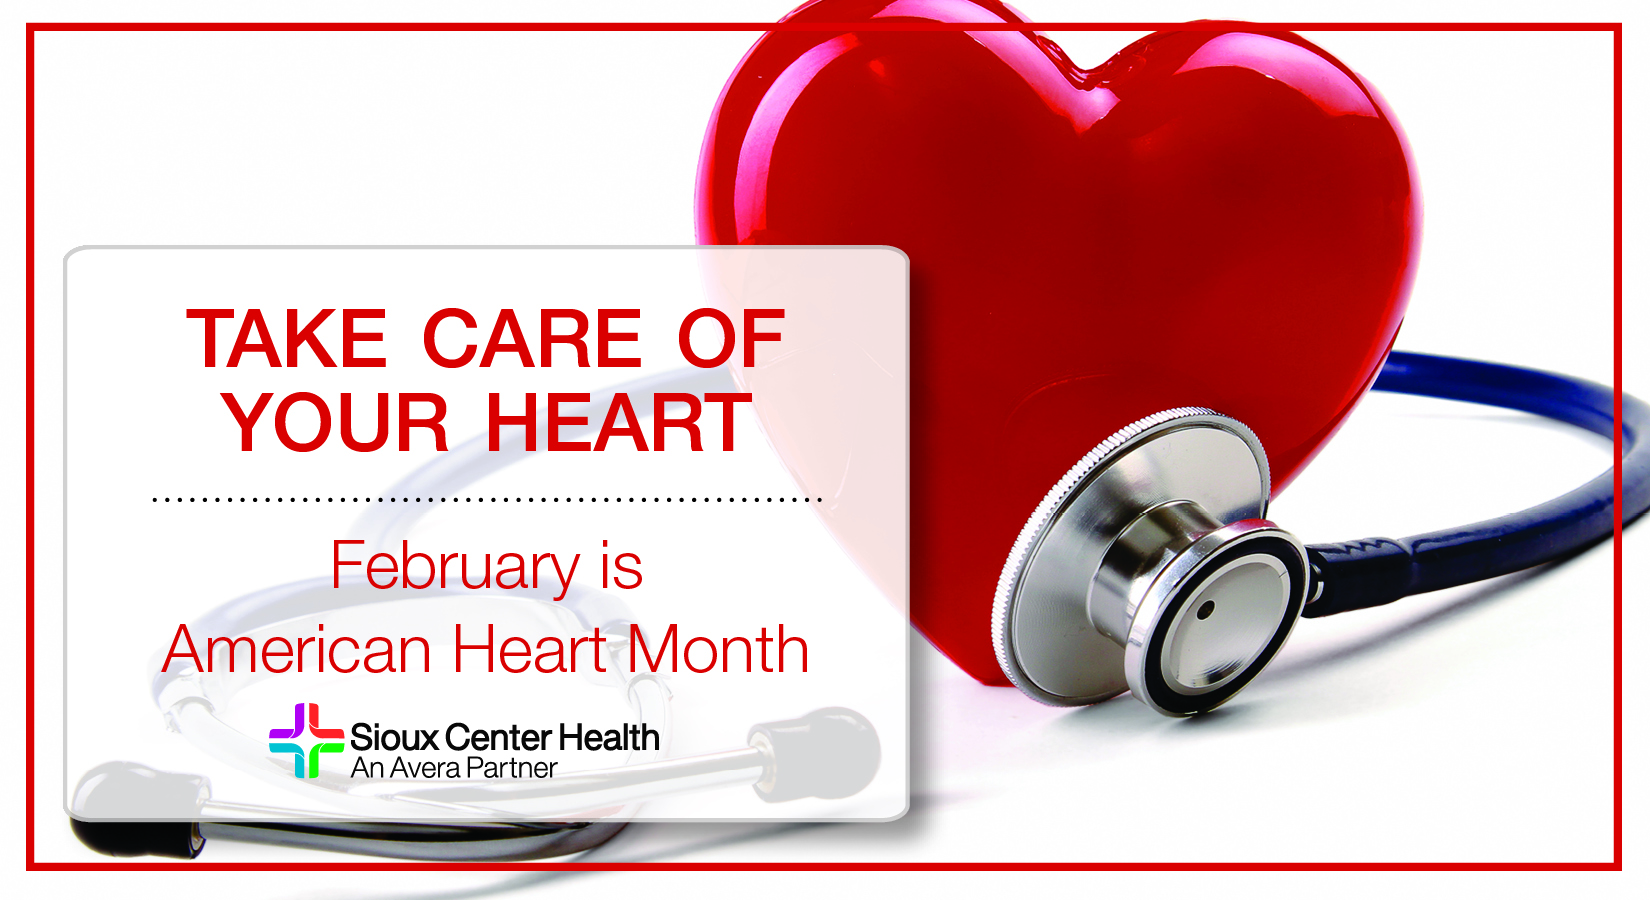 During February, Be Aware of Your Heart Health Sioux Center Health